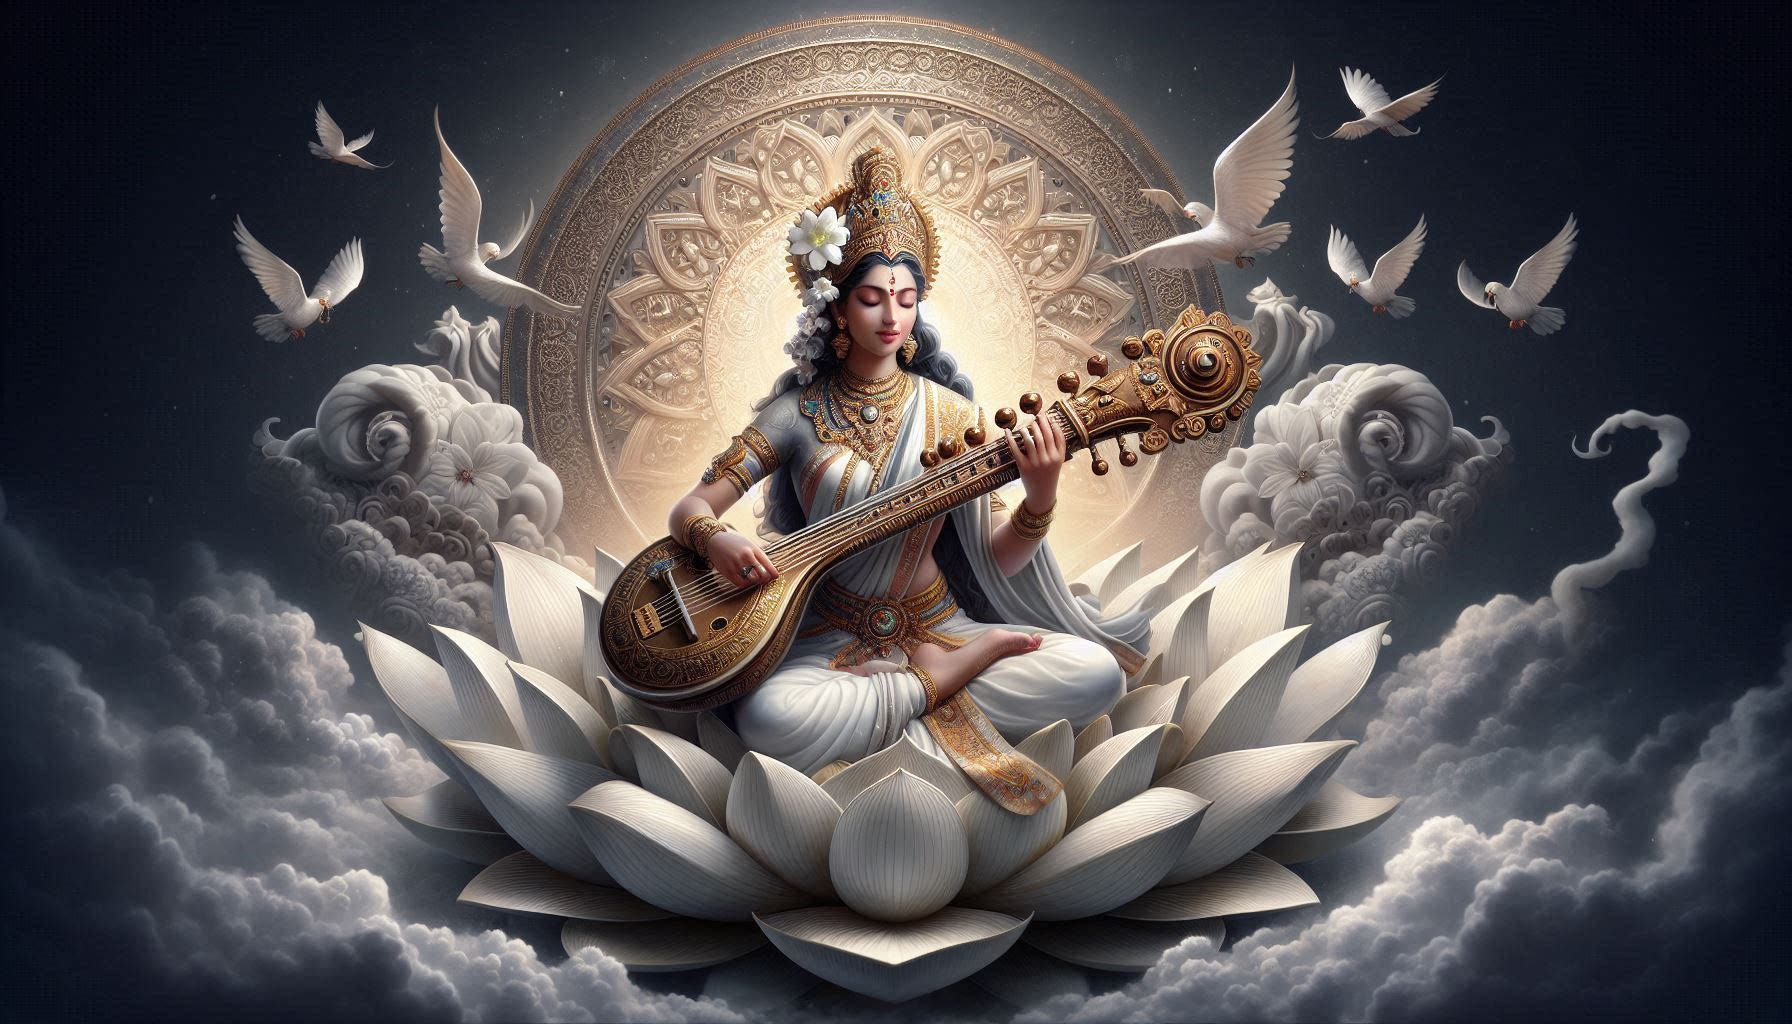 "Goddess Saraswati Images: Download Over 100+ Free HD 1080p Wallpapers from the 2024 Collection"